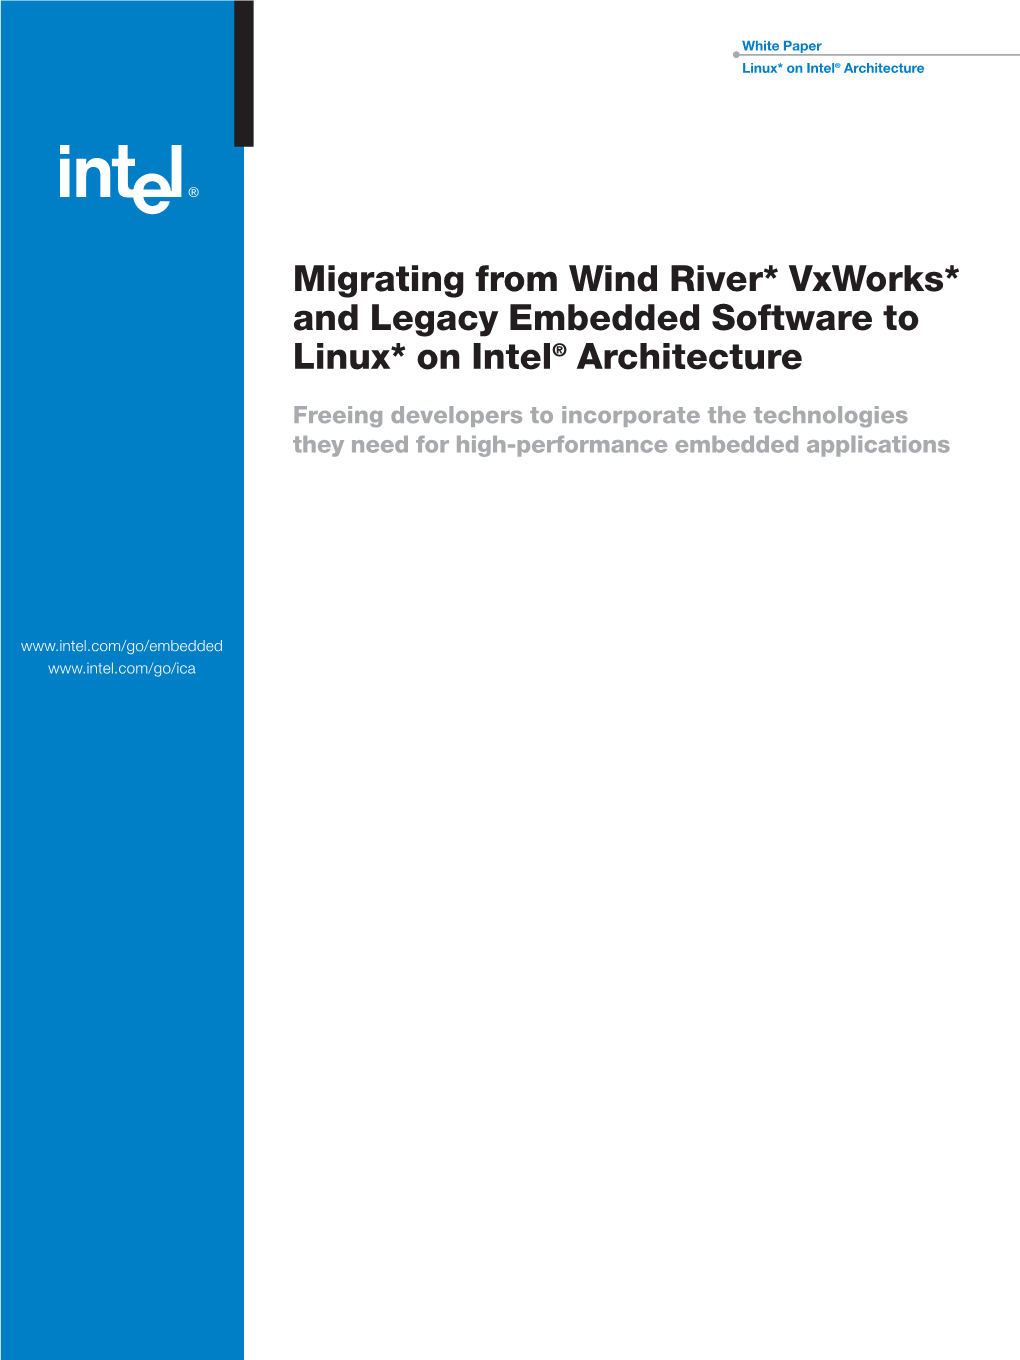 Migrating from Wind River* Vxworks* and Legacy Embedded Software to Linux* on Intel® Architecture